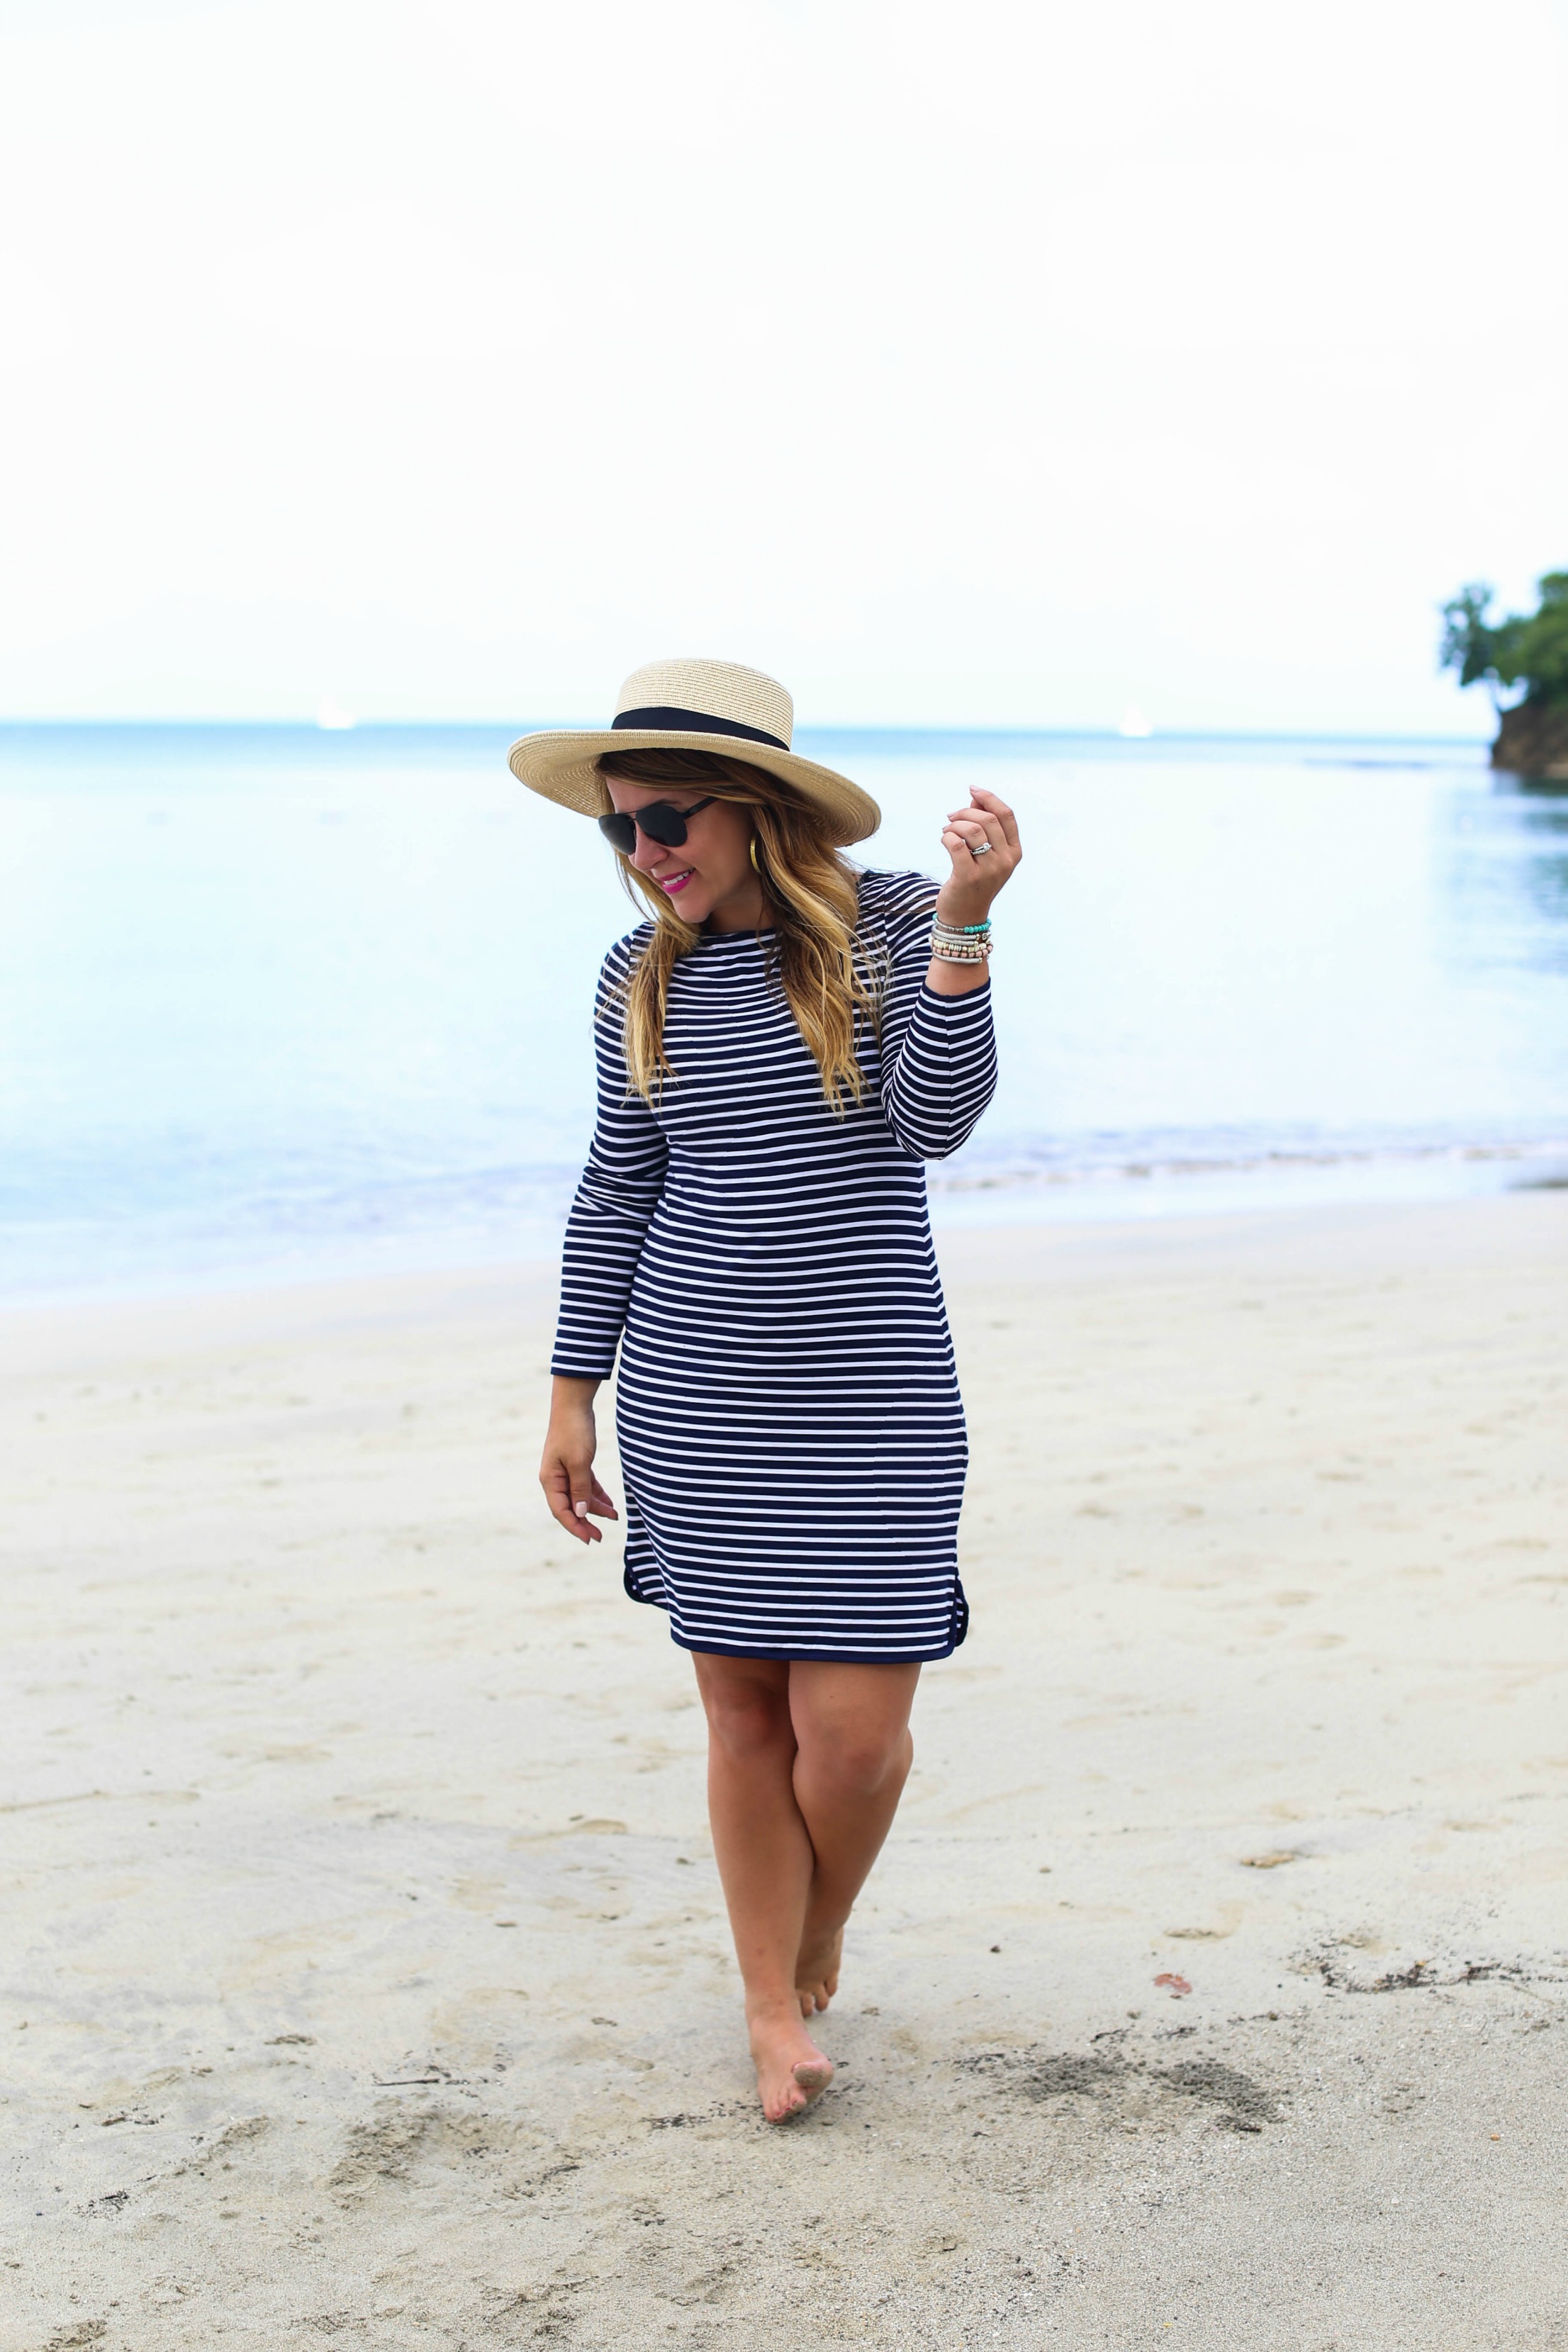 St. James Club Morgan Bay - St. Lucia Recap by lifestyle blogger Amy of Coffee Beans and Bobby Pins